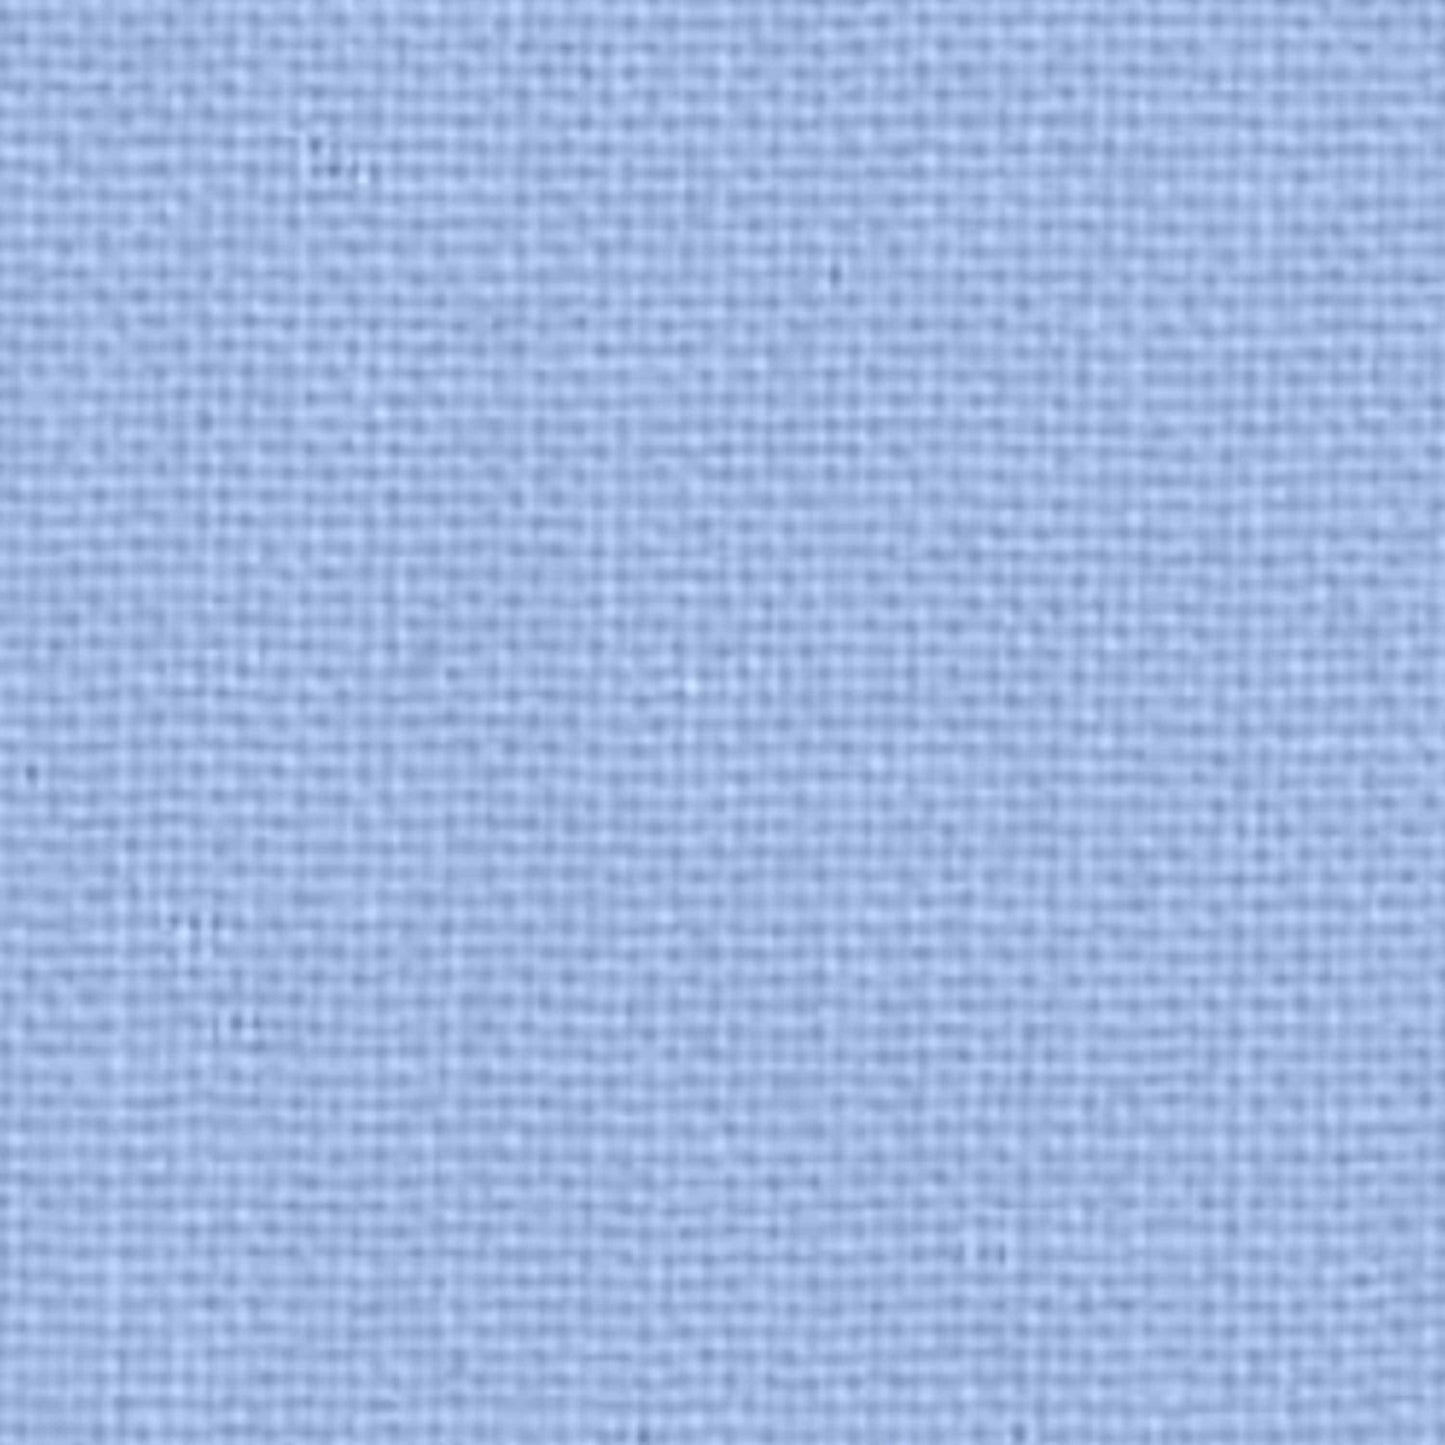 Fabric By The Yard - Space (Light Blue) Cotton Couture Fabric - SC5333-SPAC